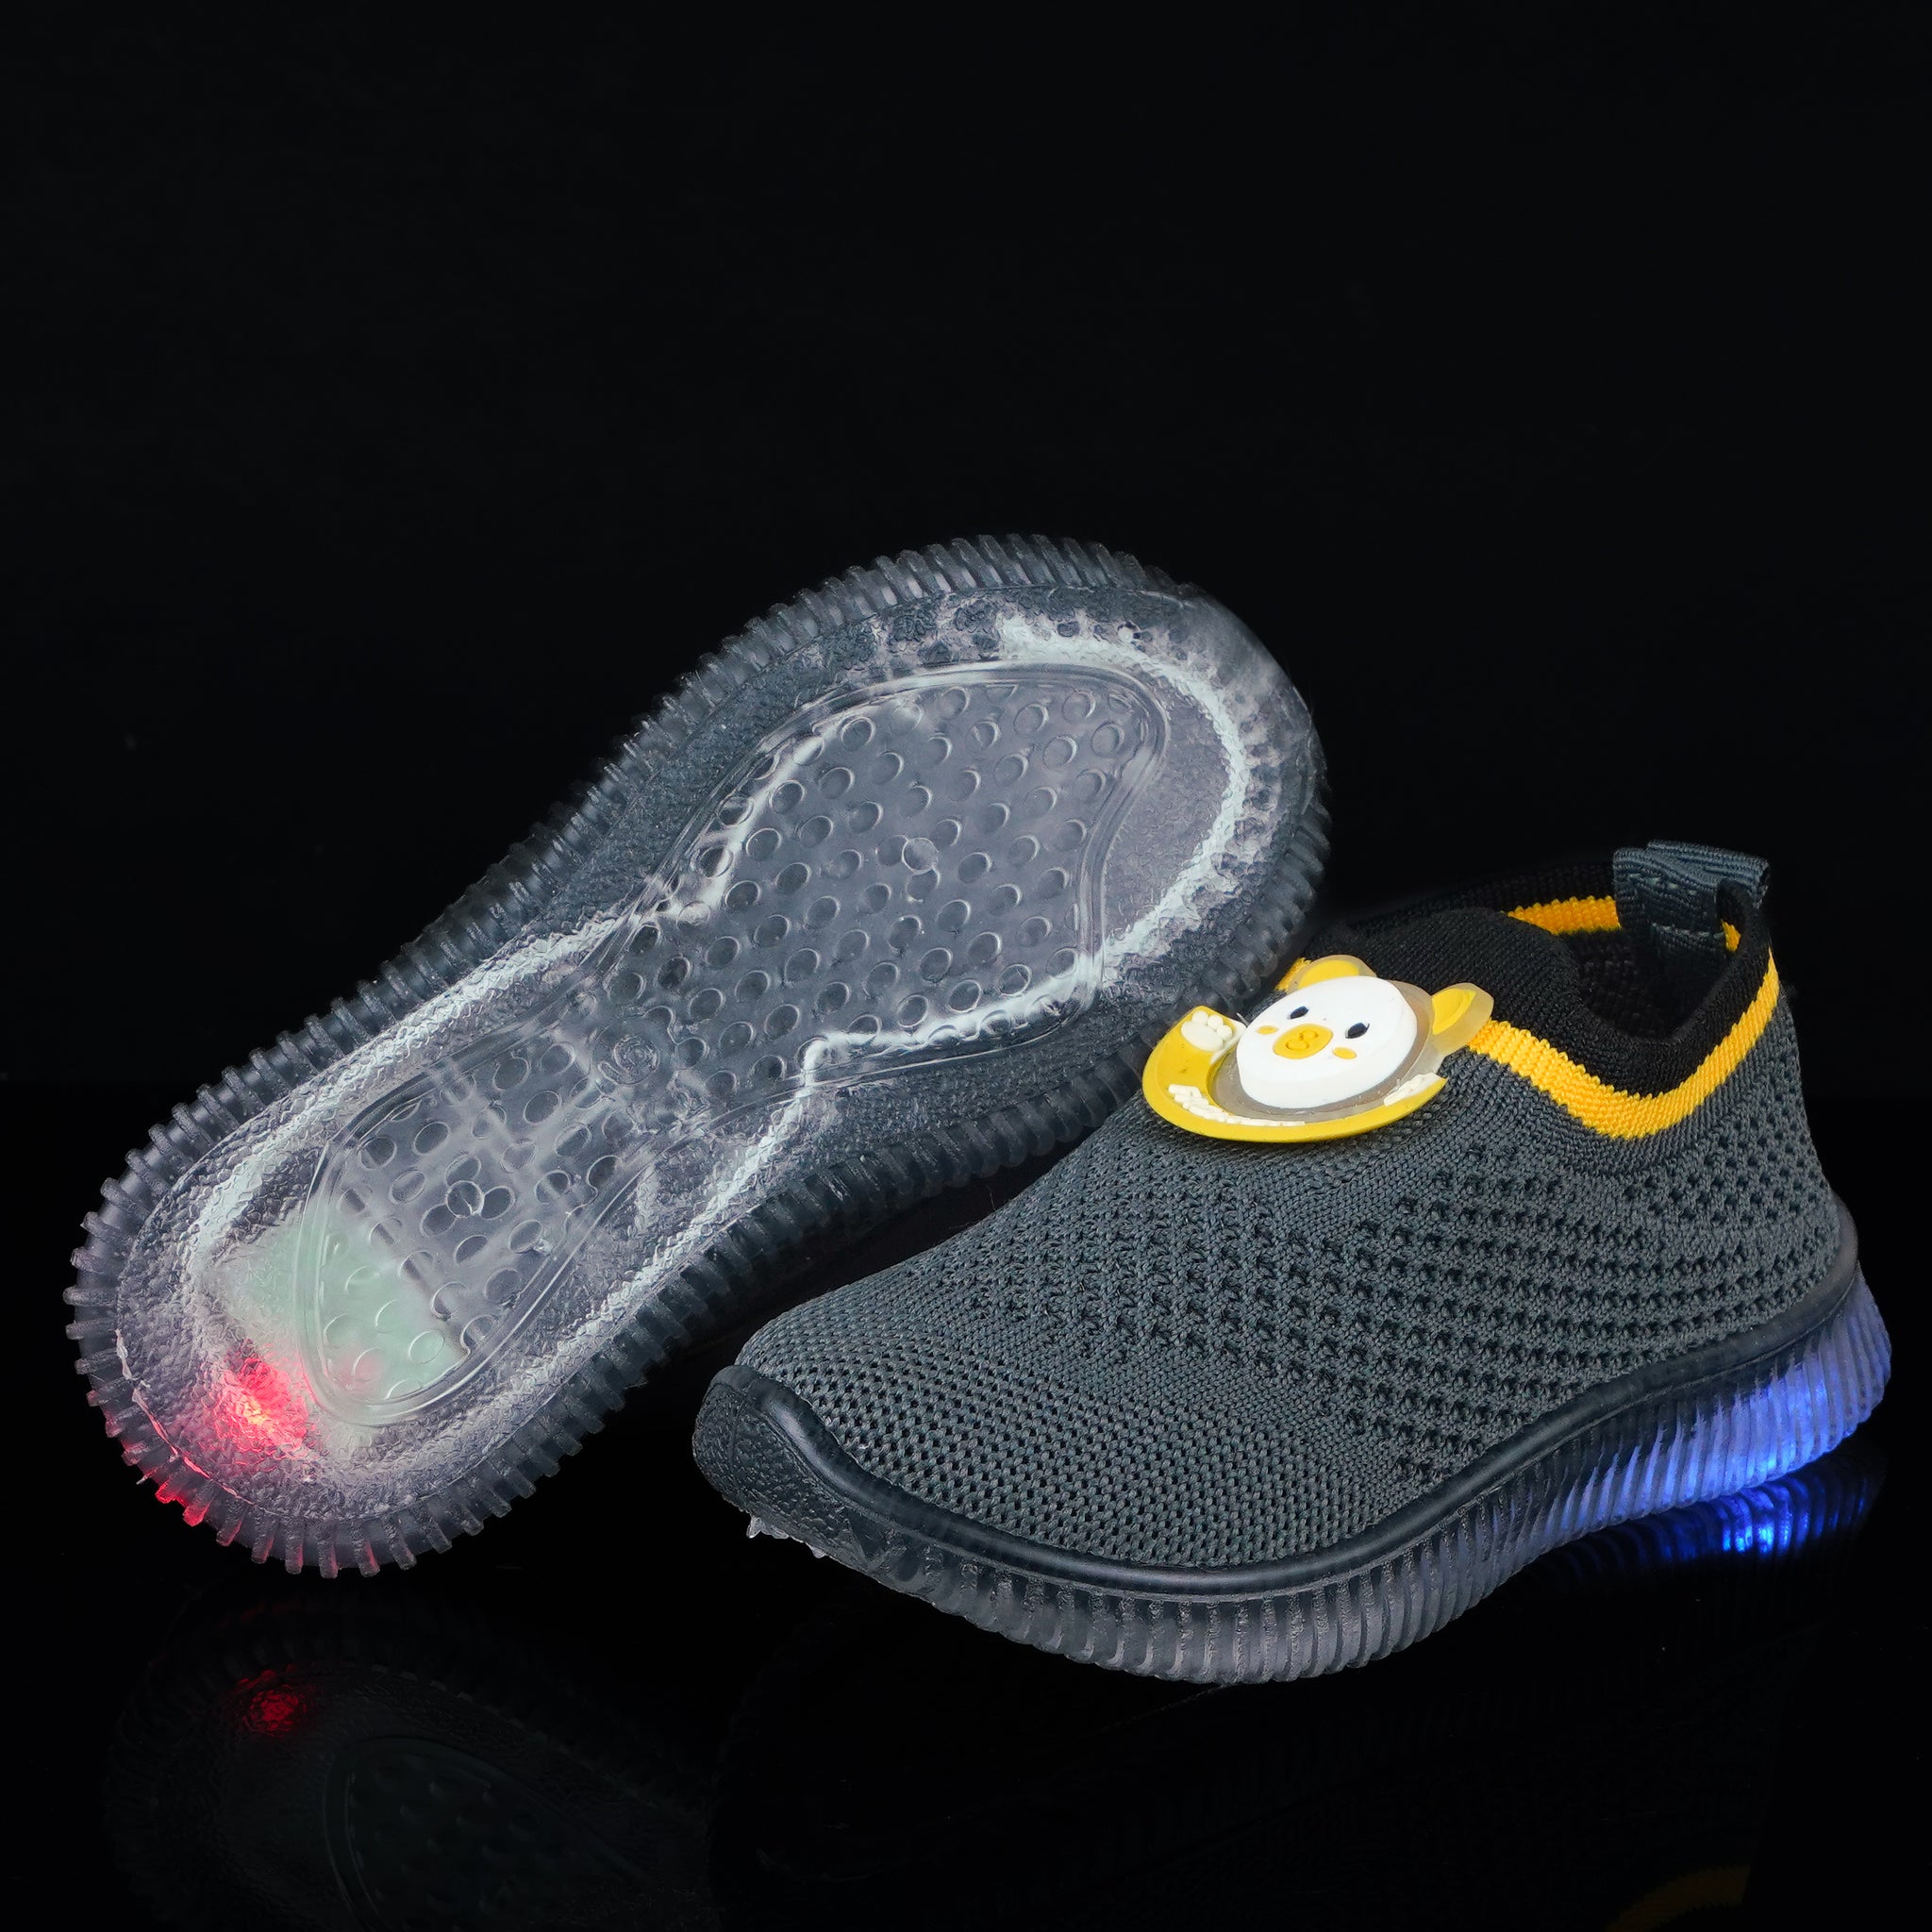 Kats GLOW-9 Kids Unisex Kids Slip on Trendy Boys and Girls Casuals with Led Light Shoes (2.5 Years to 5 Years)